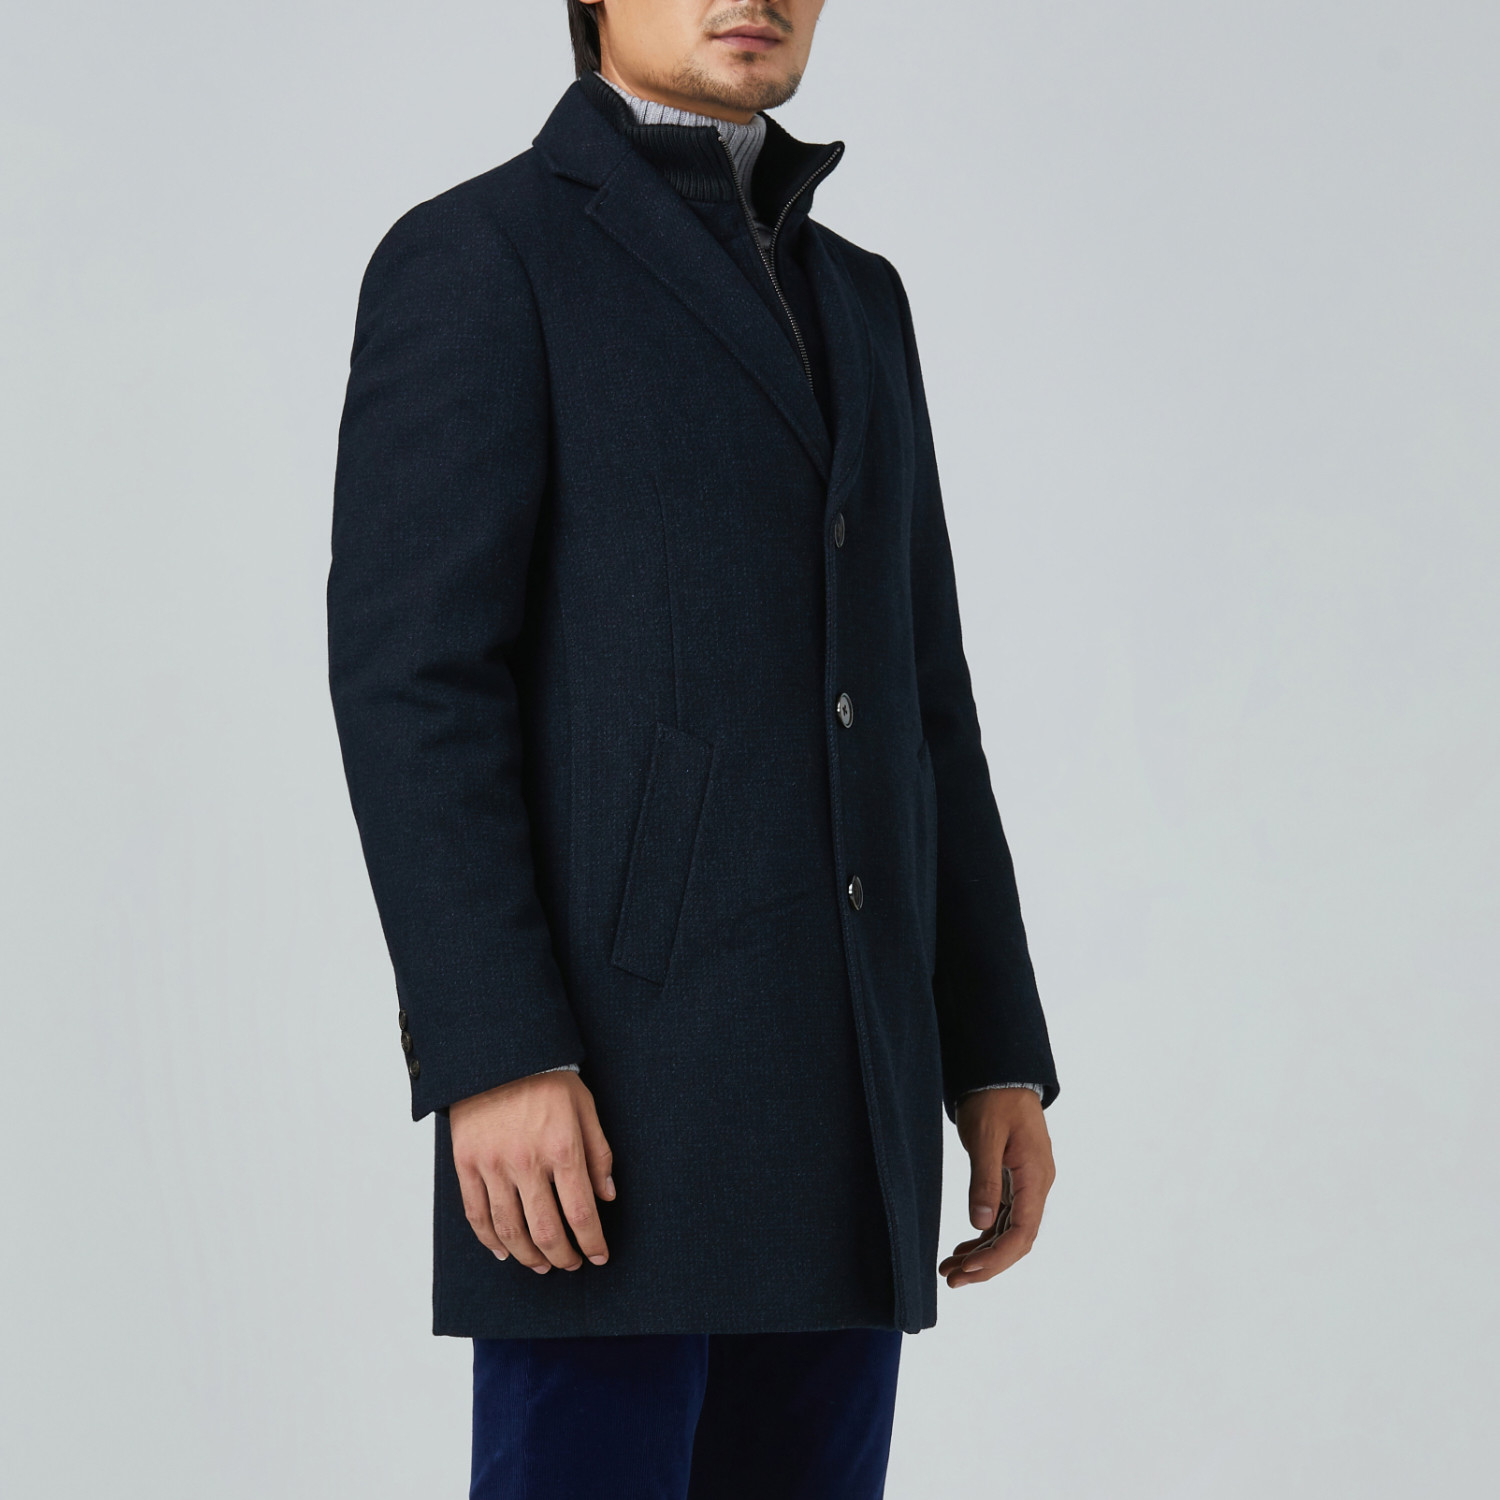 LeClaire Slim Fit Wool + Cashmere Overcoat // Navy (US: 44R) - Cardinal ...